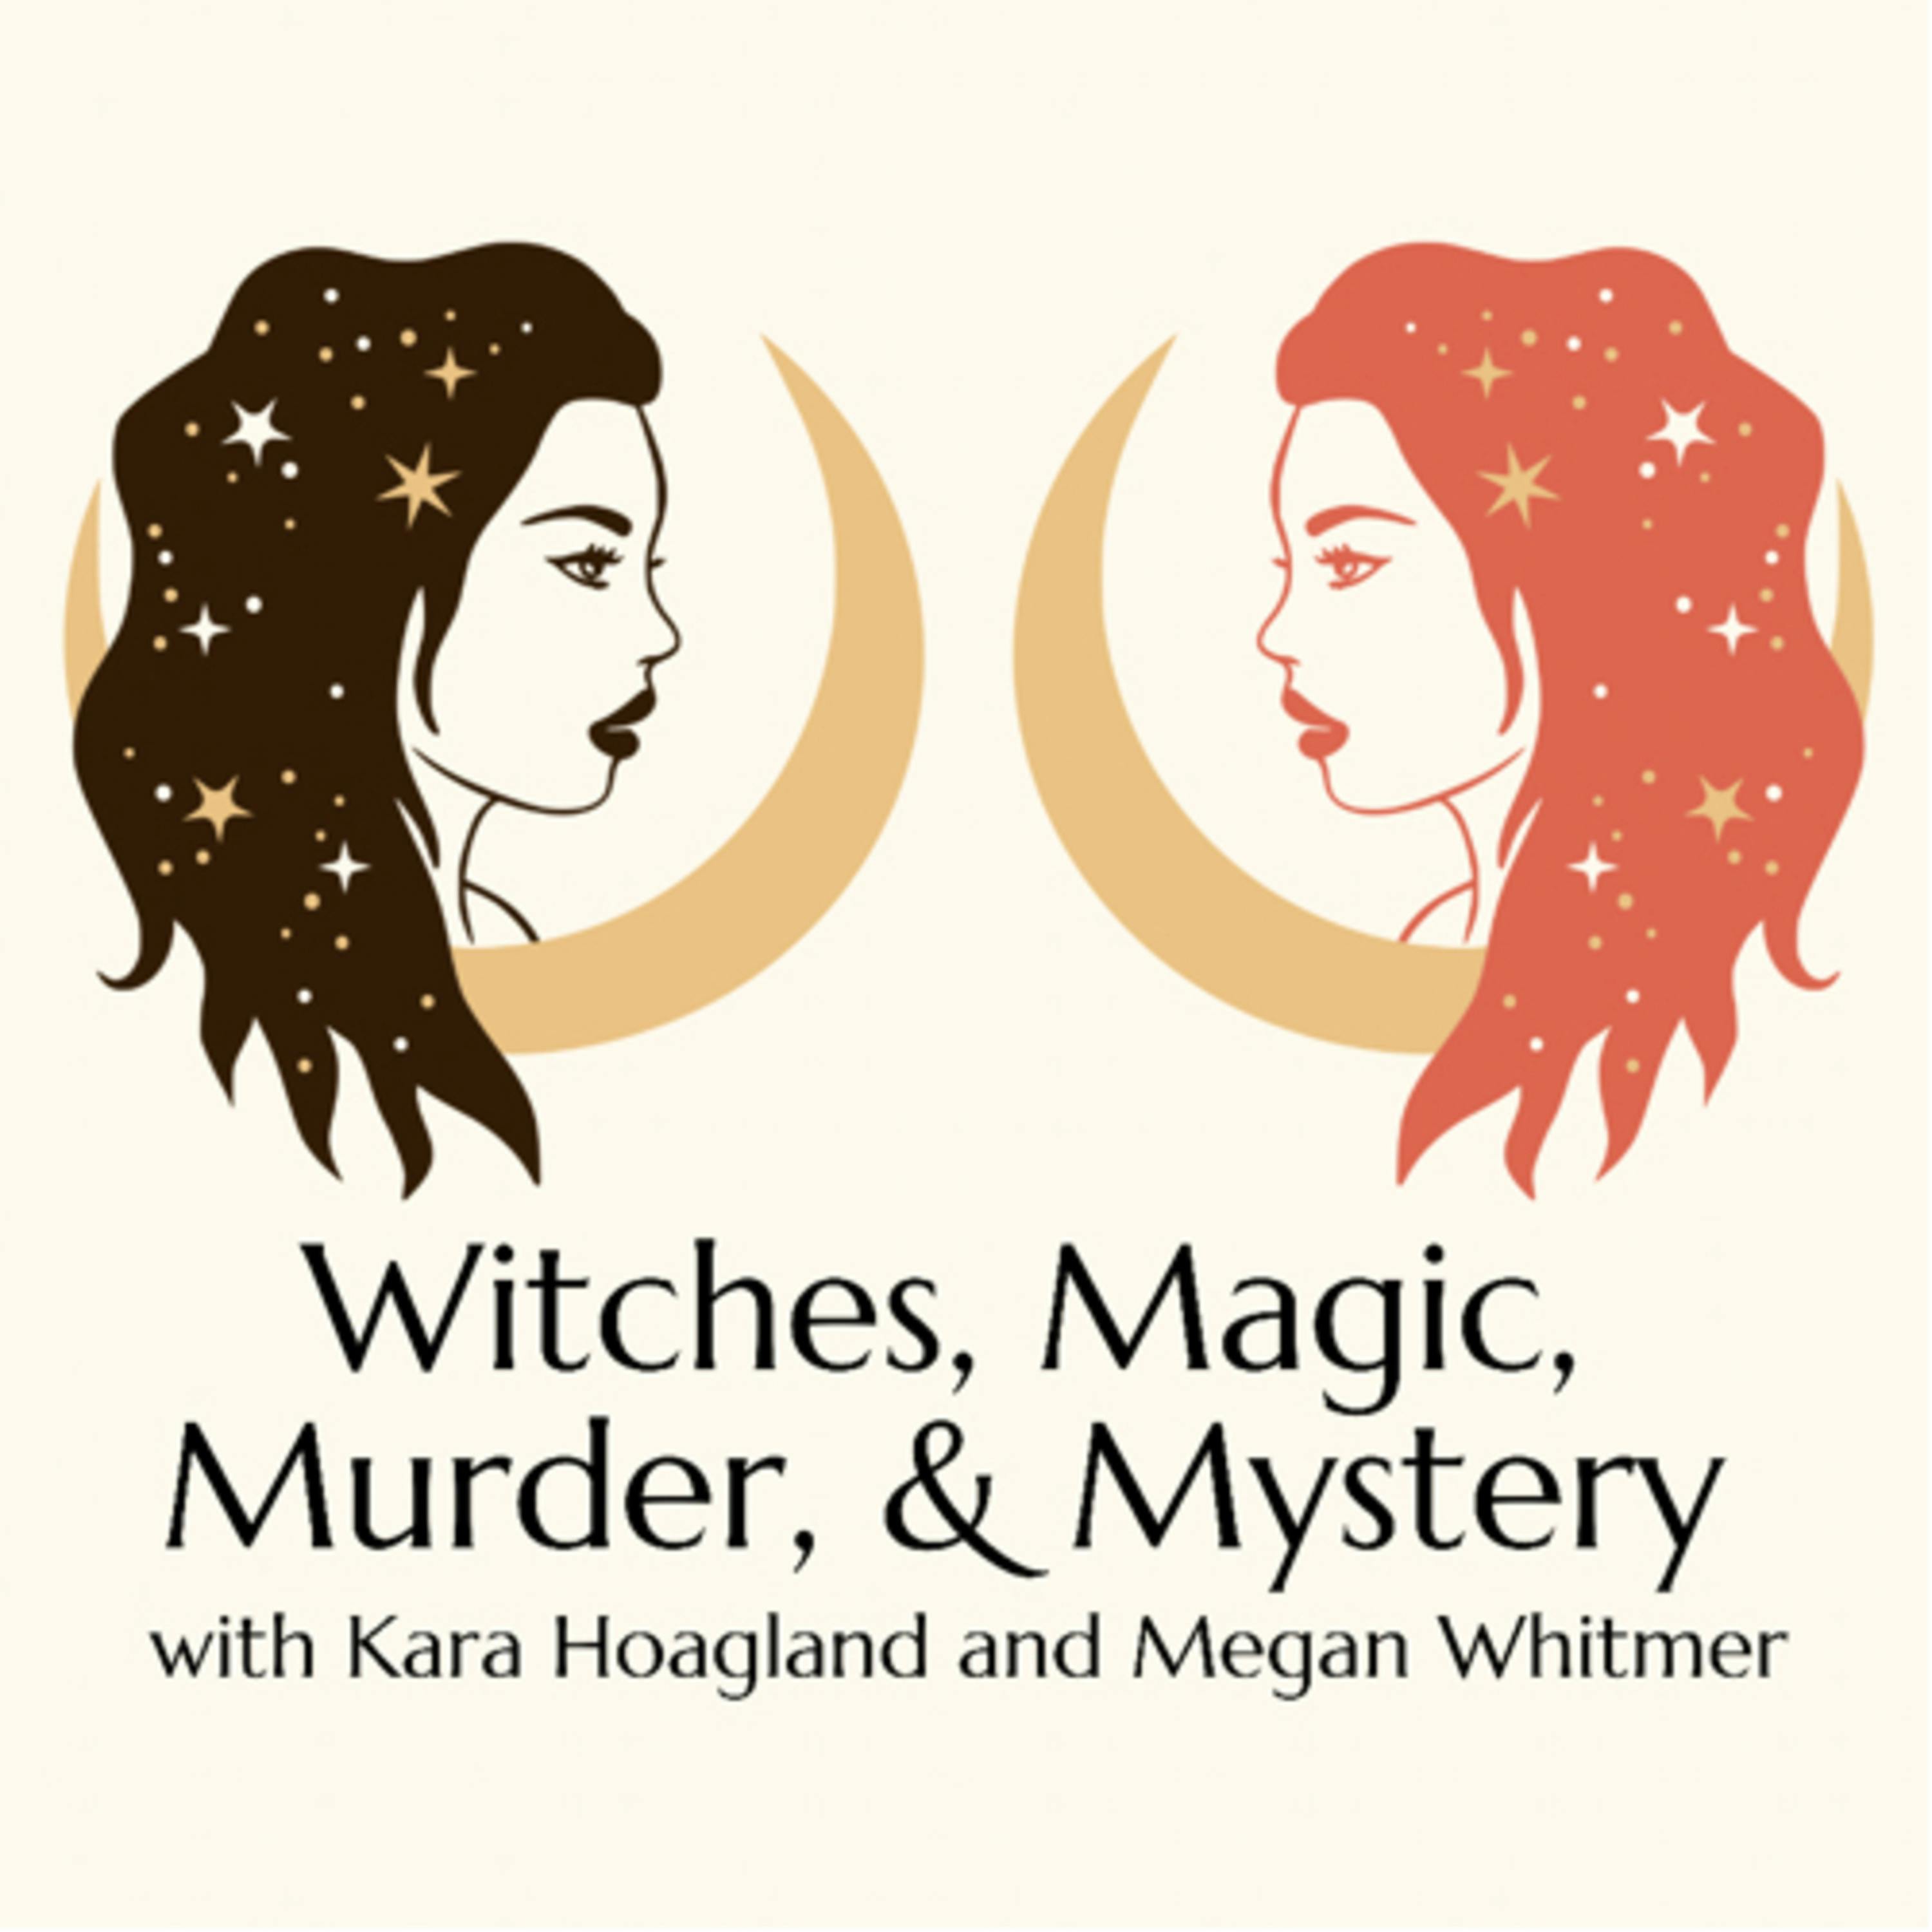 267. MYSTERY: The Motivations of Patricia Hearst